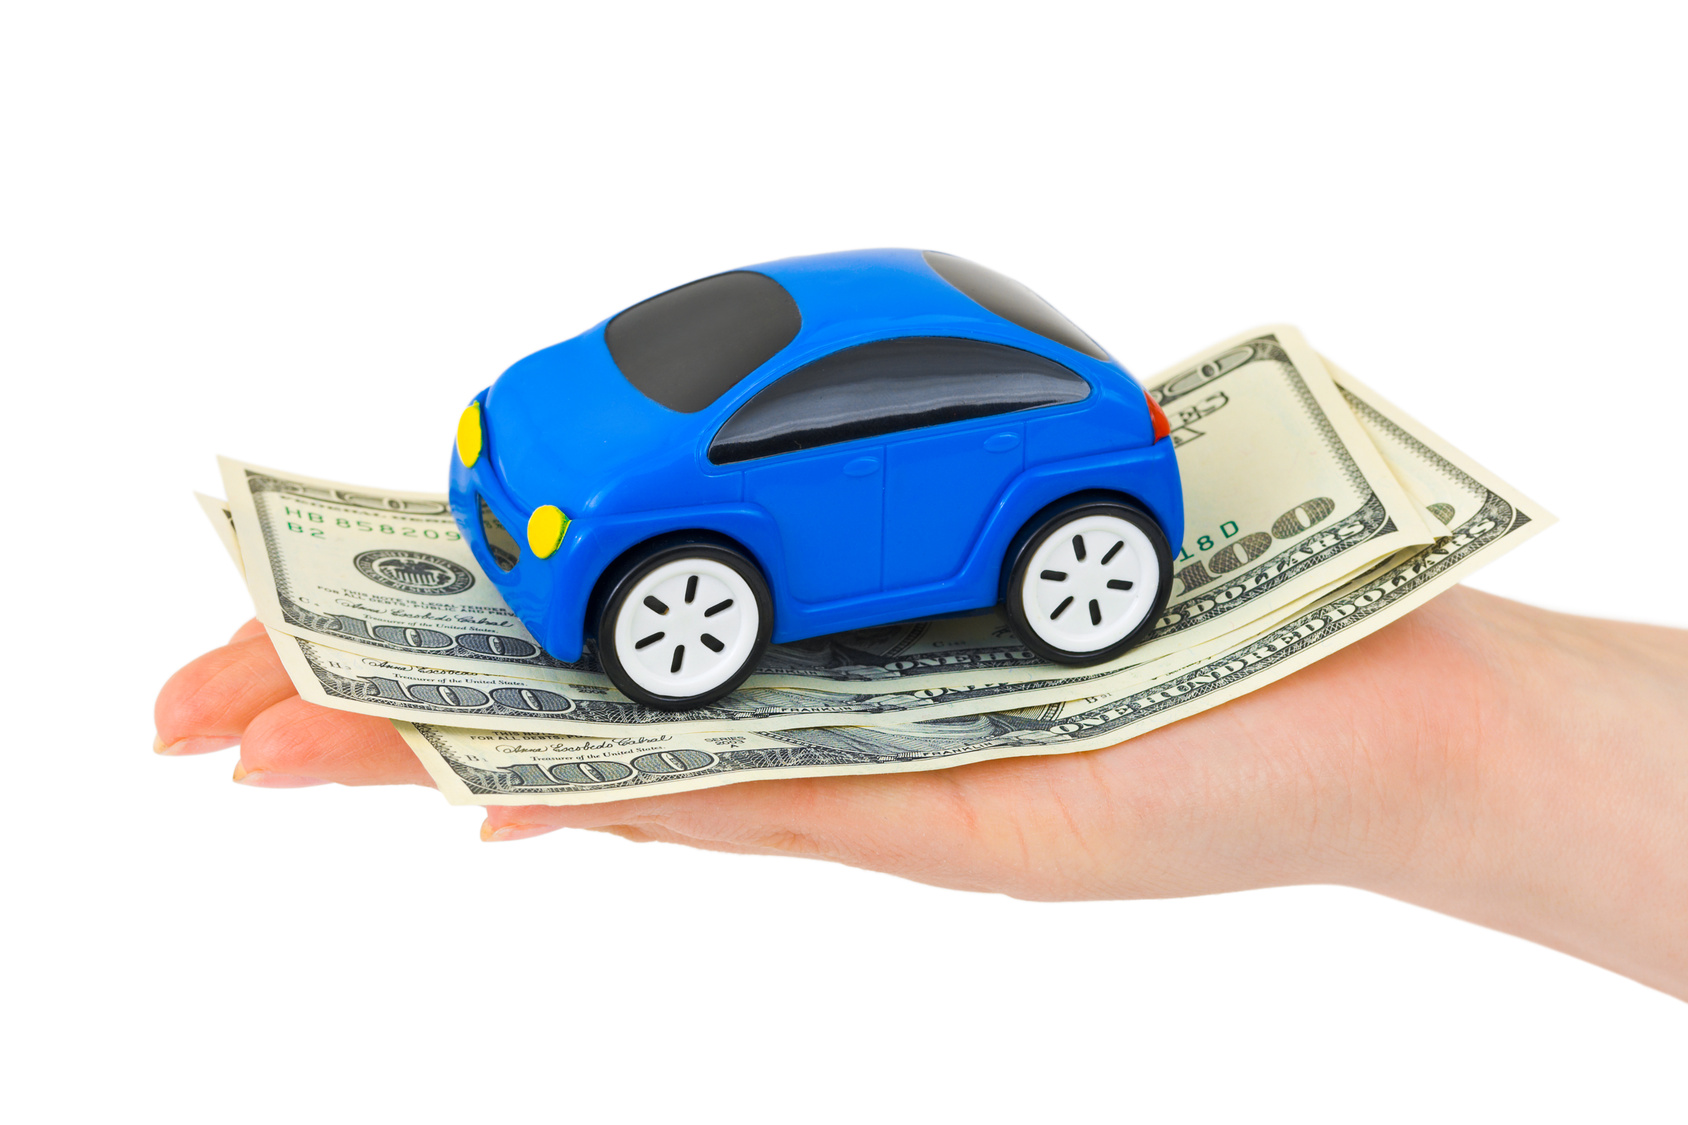 So You've Bought Car Insurance Quotation ... Now What?